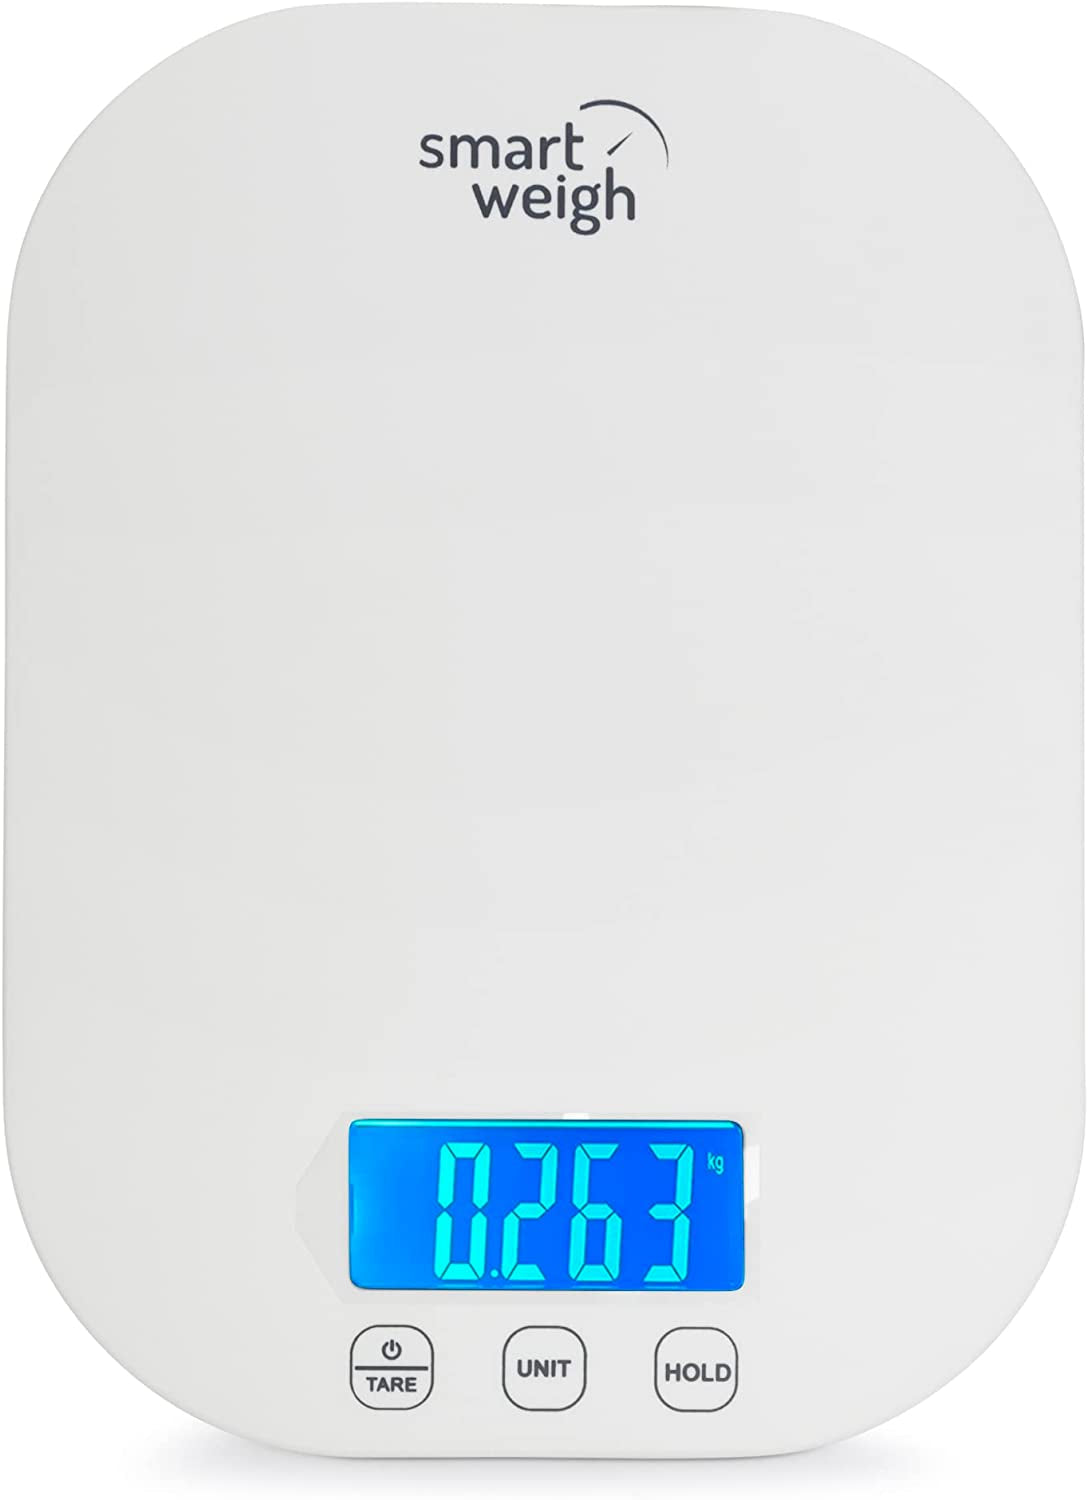 Smart Weigh 11 lb. Digital Kitchen Food Scale, Mechanical Accurate Weight Scale with 5-Unit Modes, Grams and Ounces for Weight Loss,Weighing Ingredients, Dieting, Keto Cooking , Meal Prep and Baking